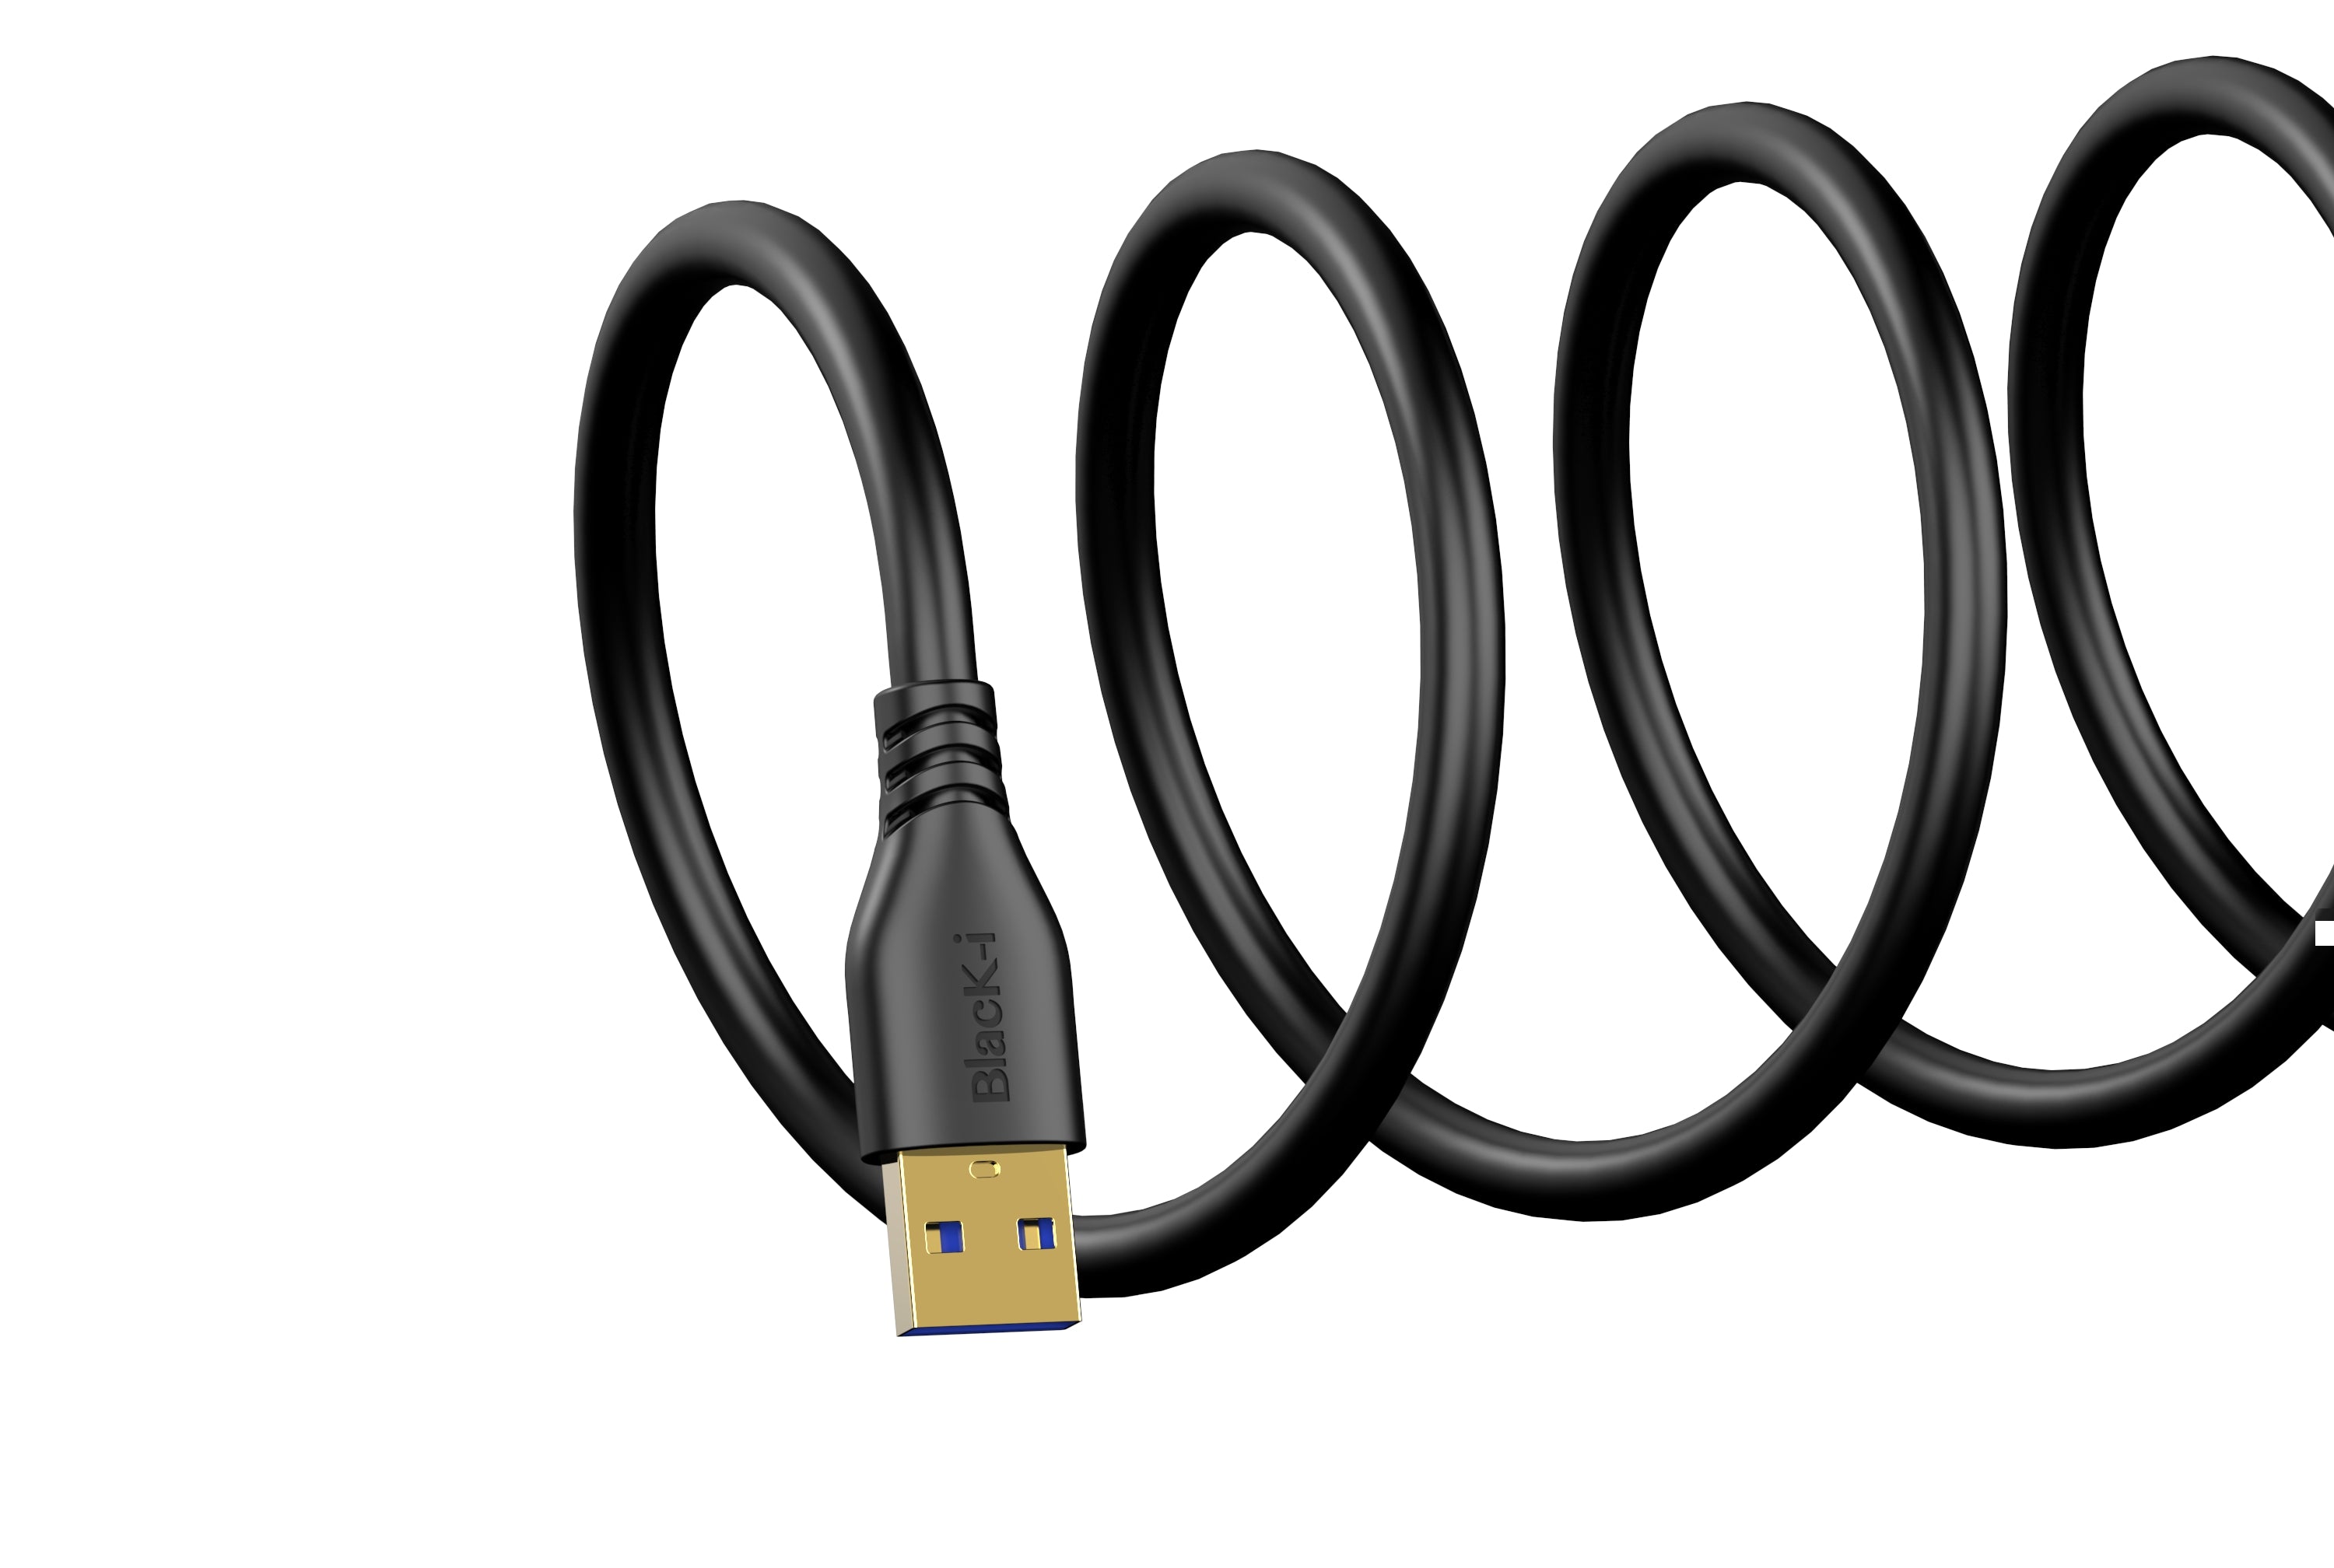 Black-i USB 3.0 Male to Male Cable - 2 Meter Length – Swift Data Transfer and Efficient Connectivity for Your Devices